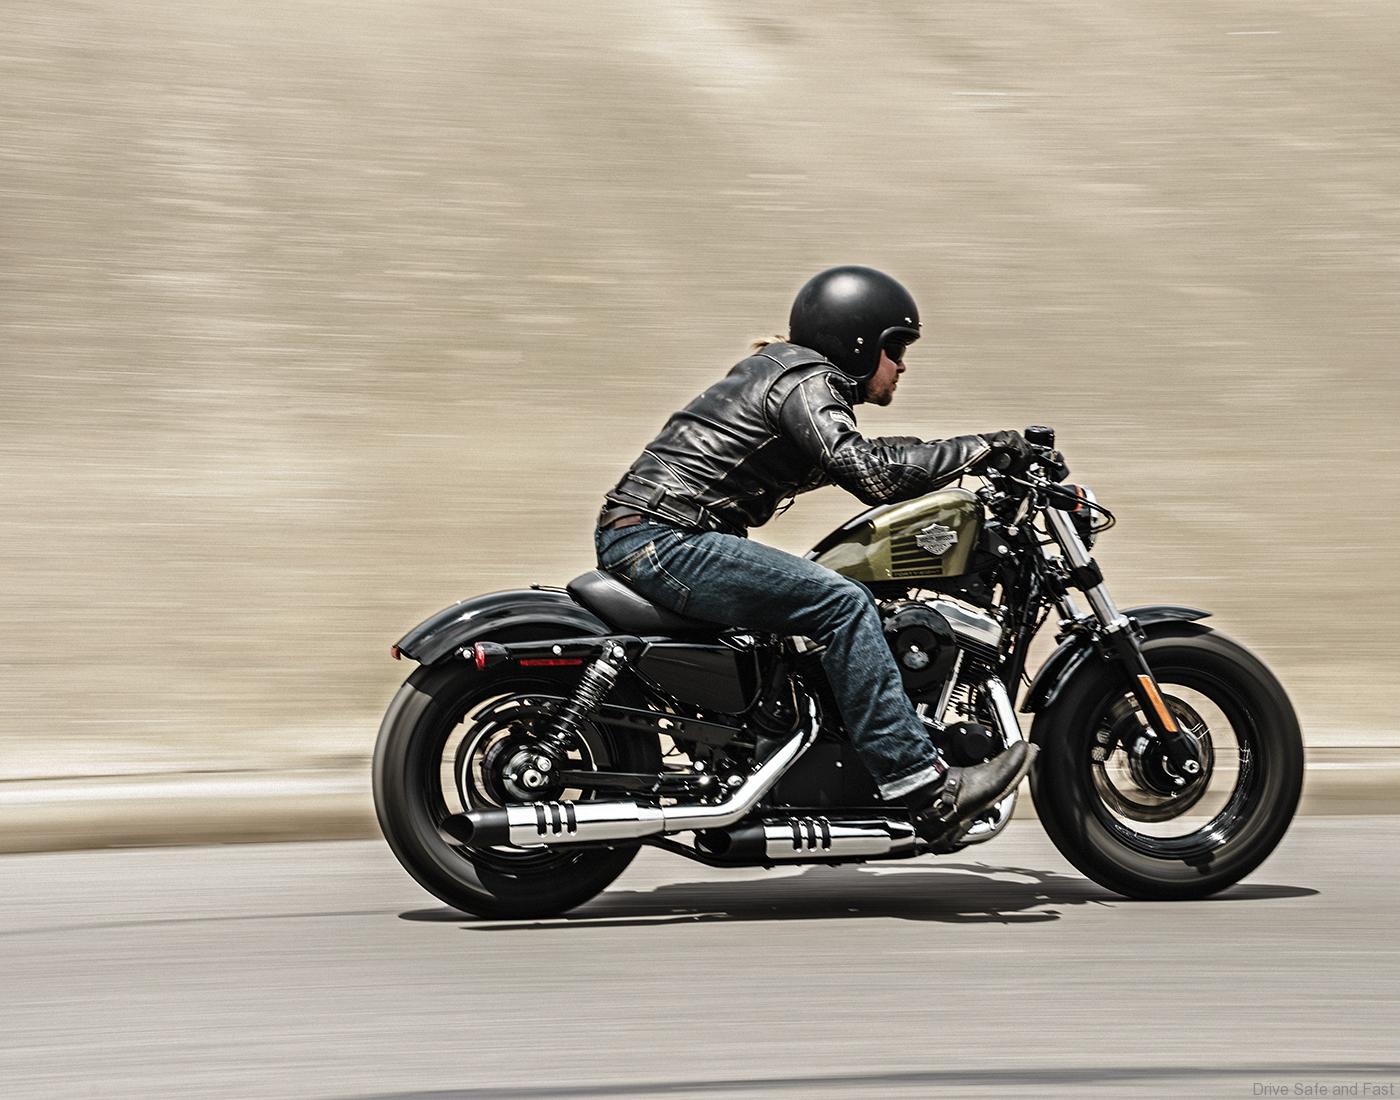 Harley Davidson Launches Passport To Freedom Campaign